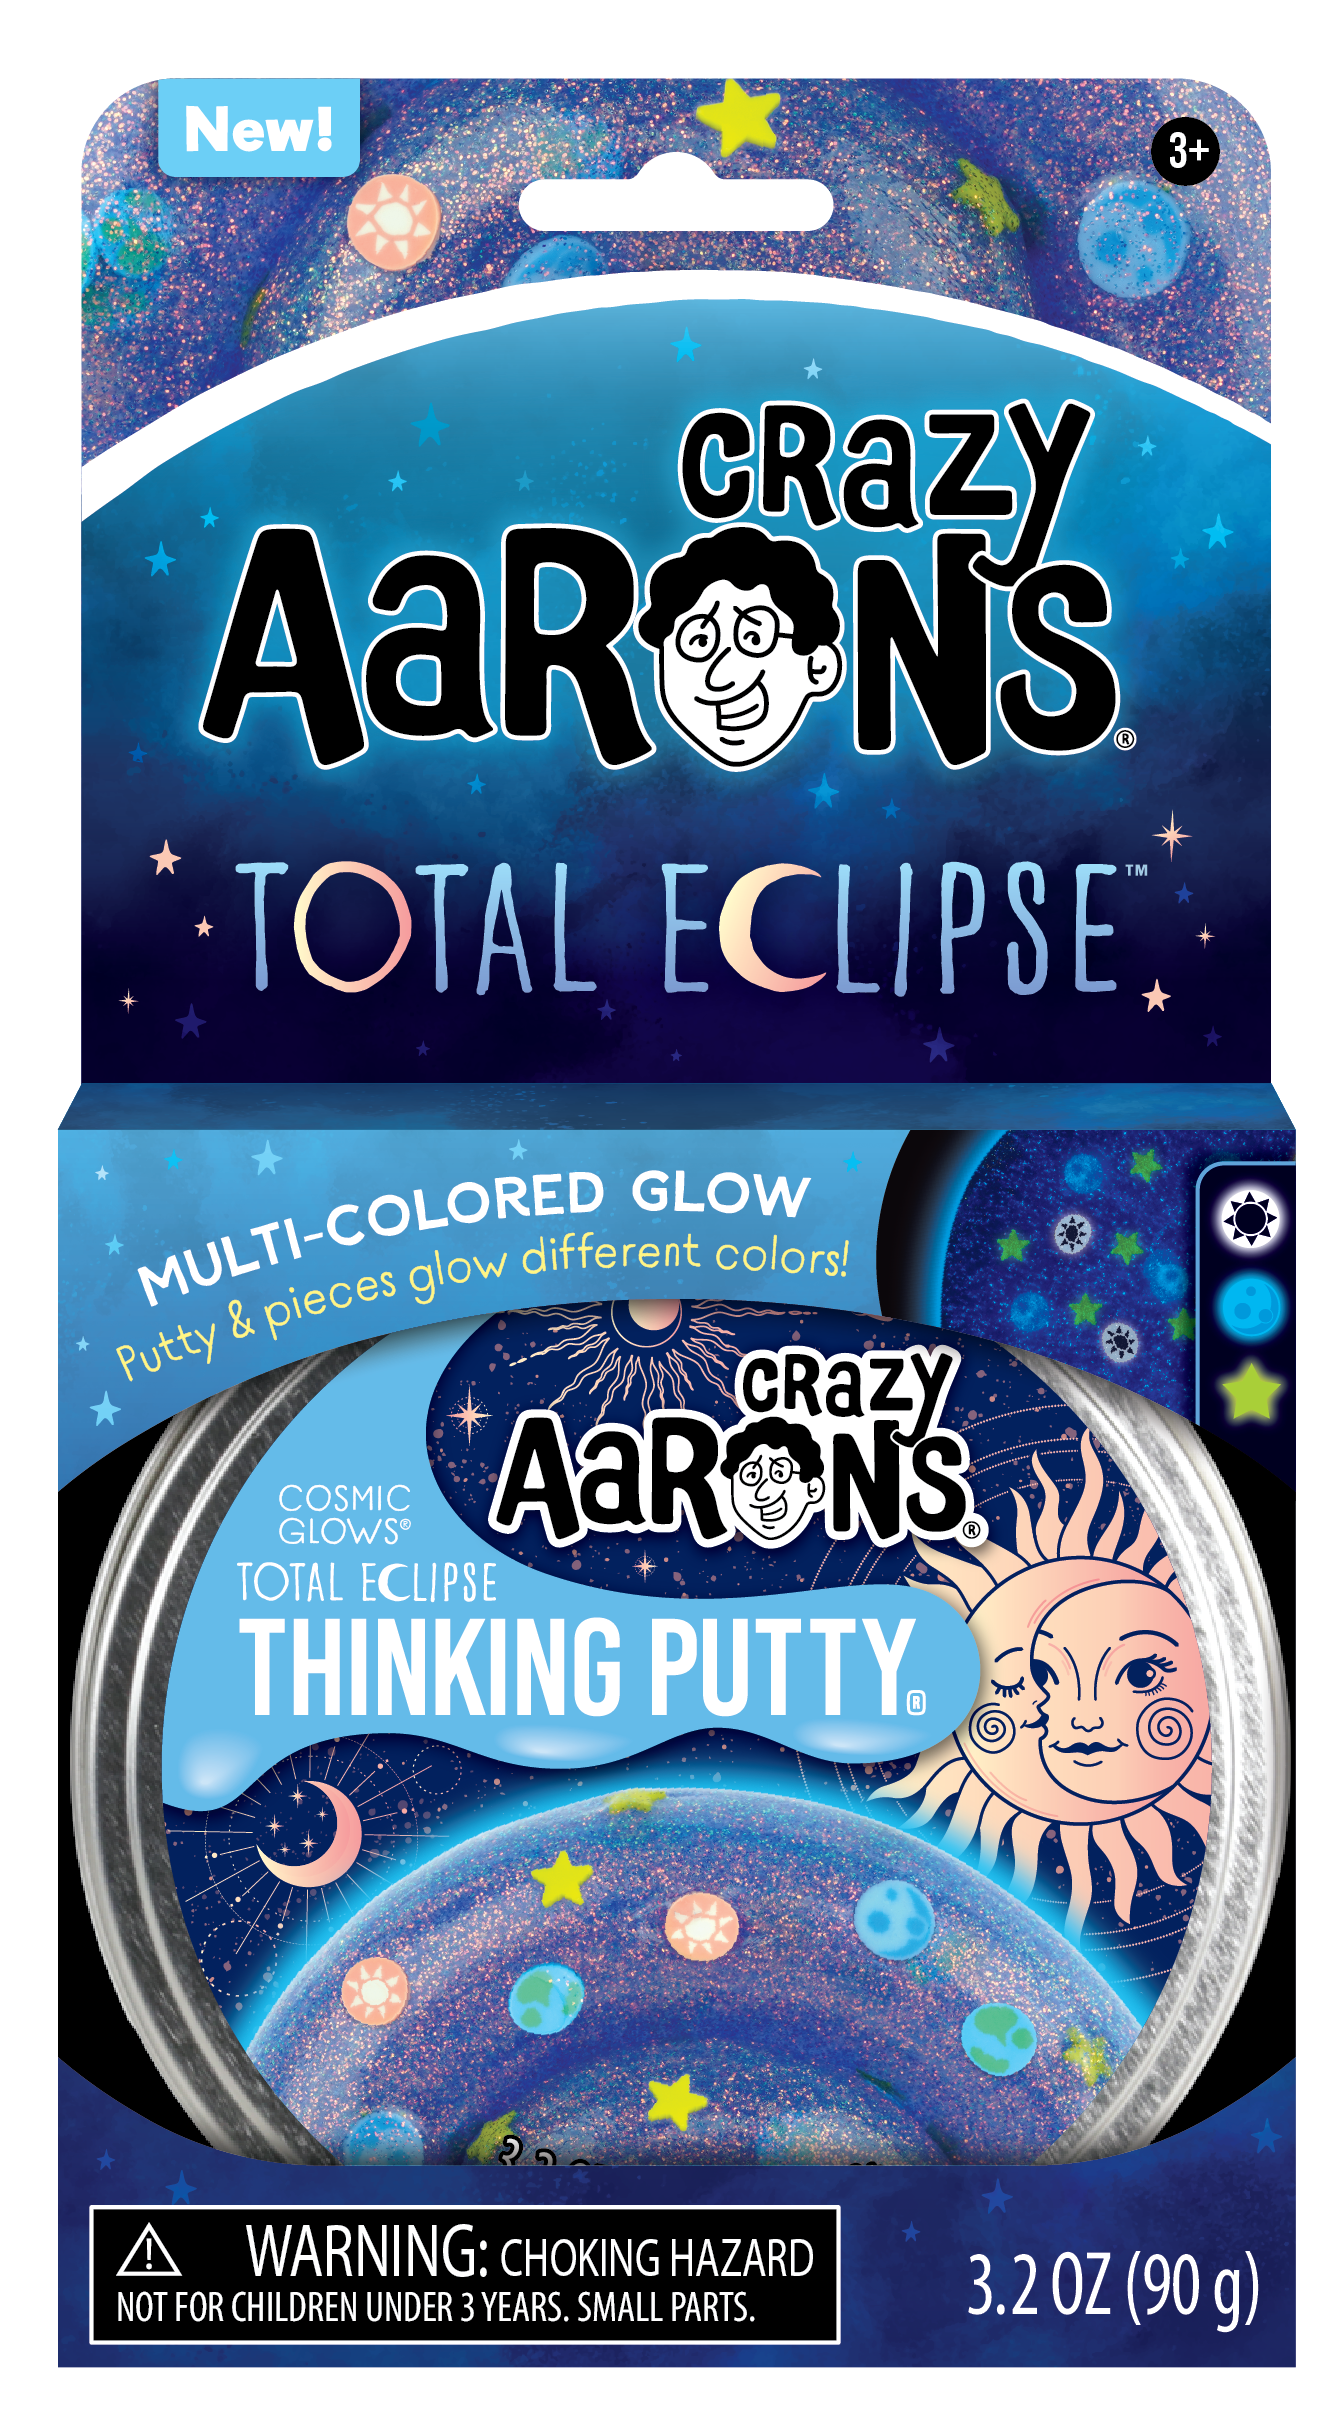 Total Eclipse 4” Thinking Putty by Crazy Aaron’s #TO020